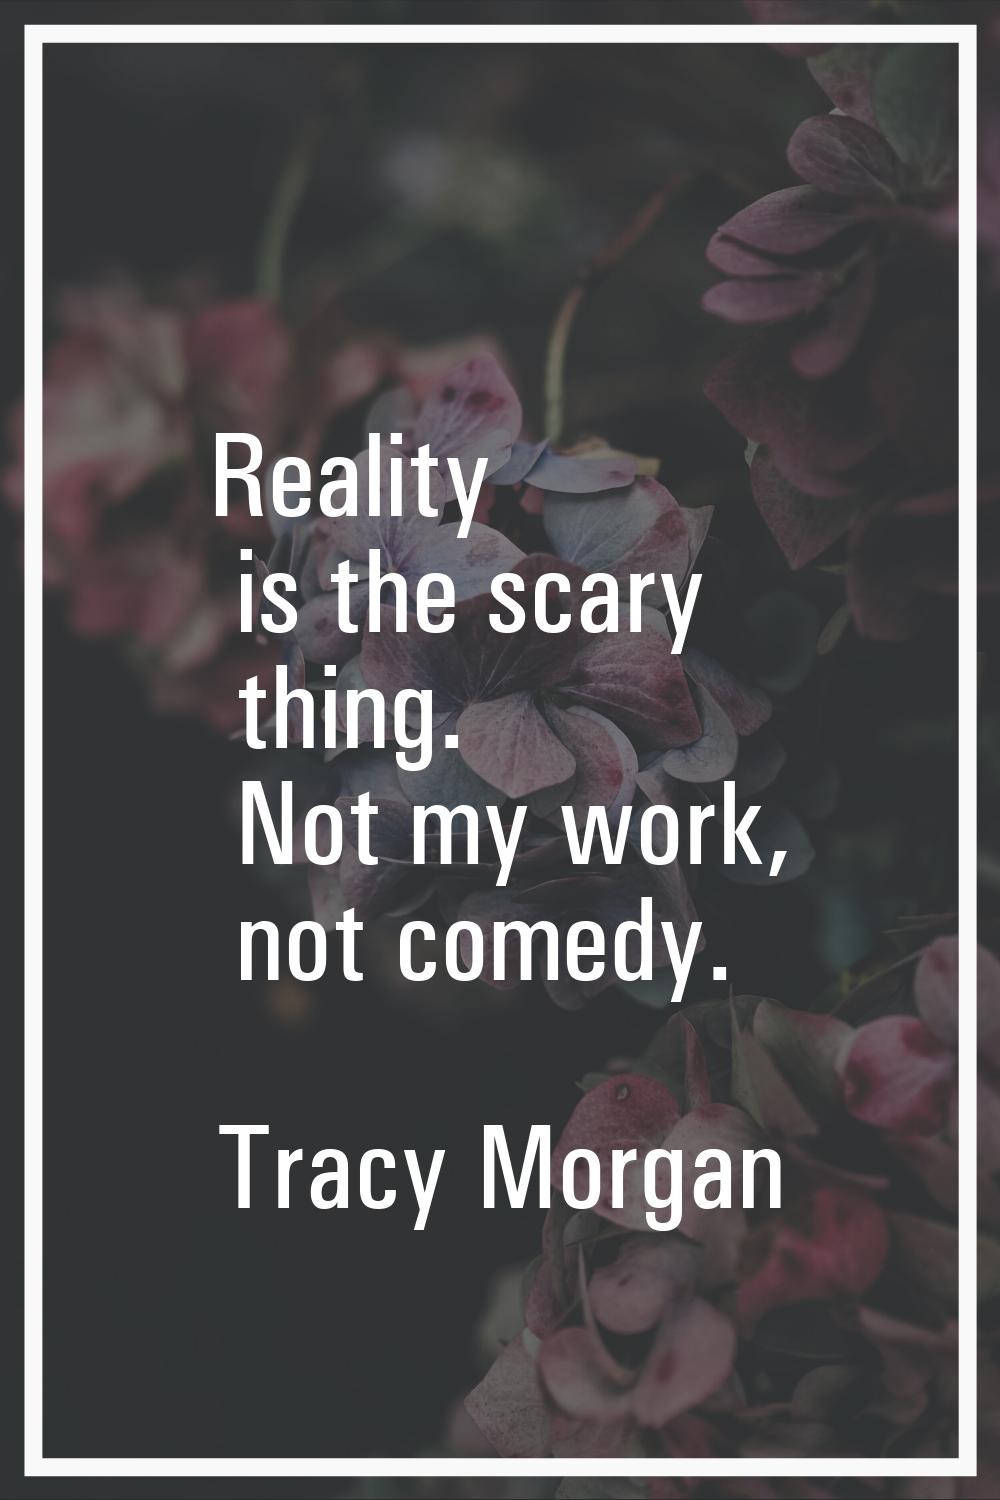 Reality is the scary thing. Not my work, not comedy.